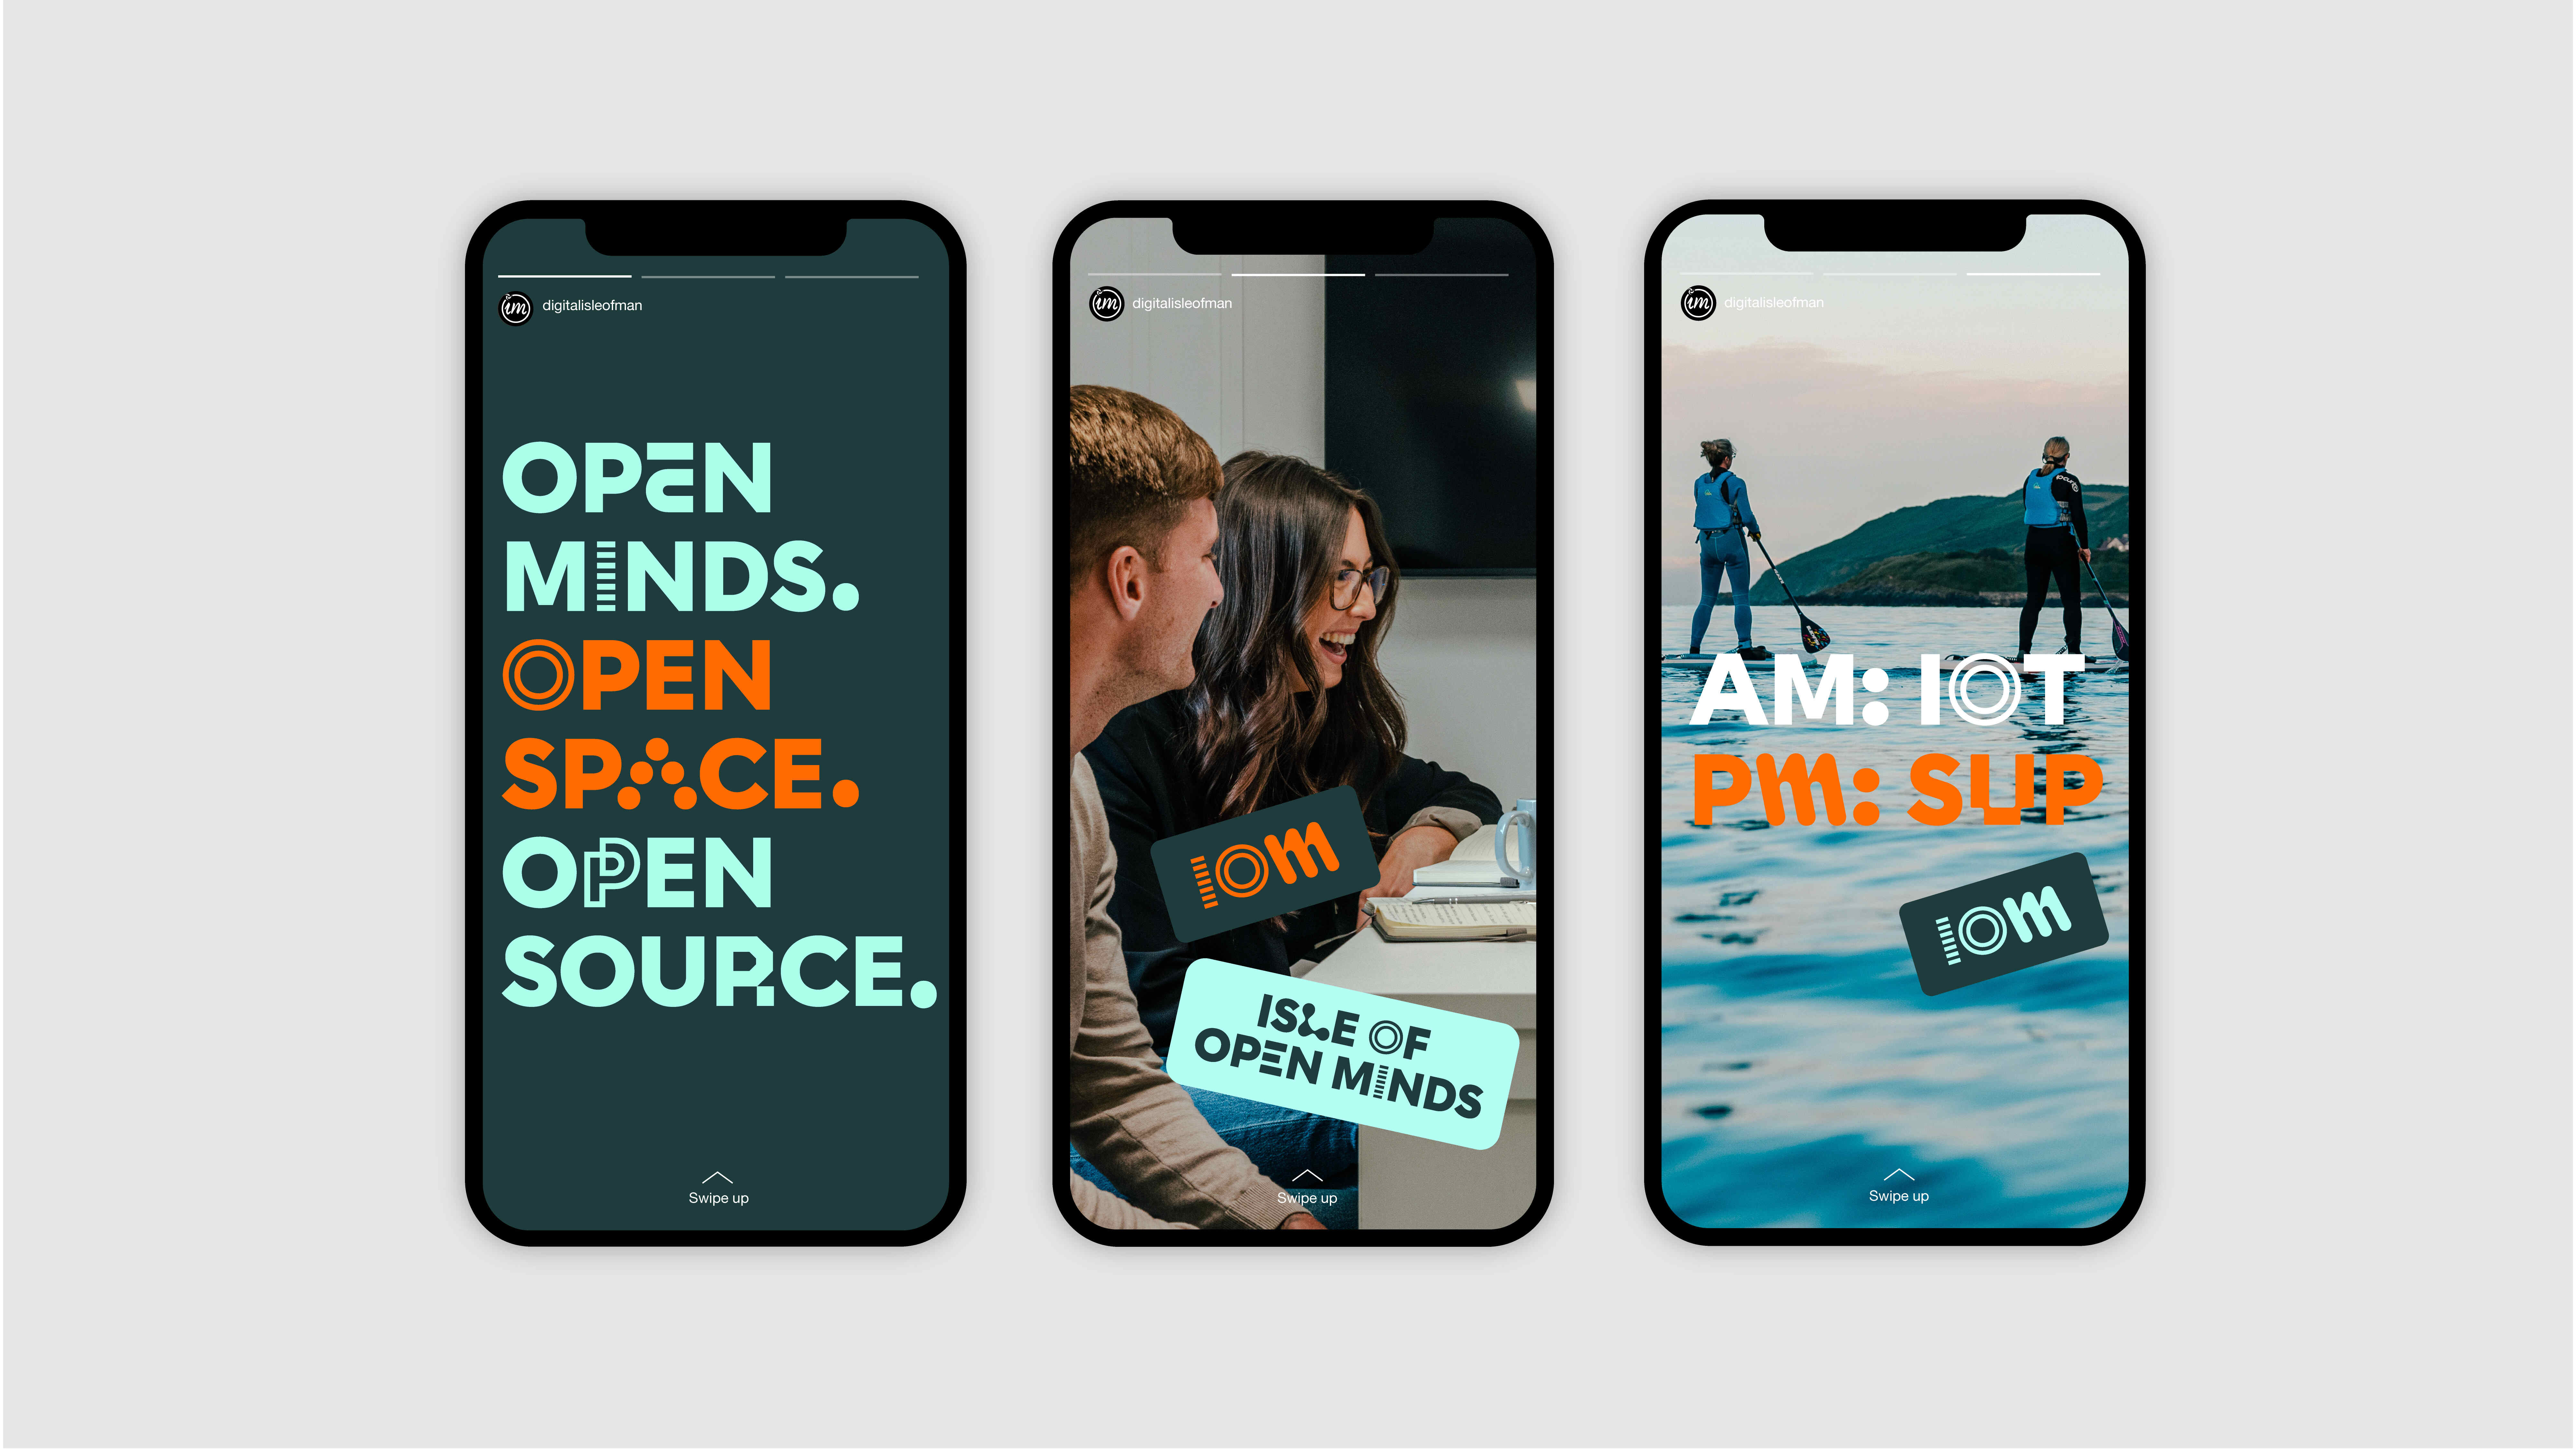 Isle of Man Becomes the ‘Isle of Open Minds’ in New Brand Campaign by Lantern, Showcasing the Island as a Centre of Digital Innovation